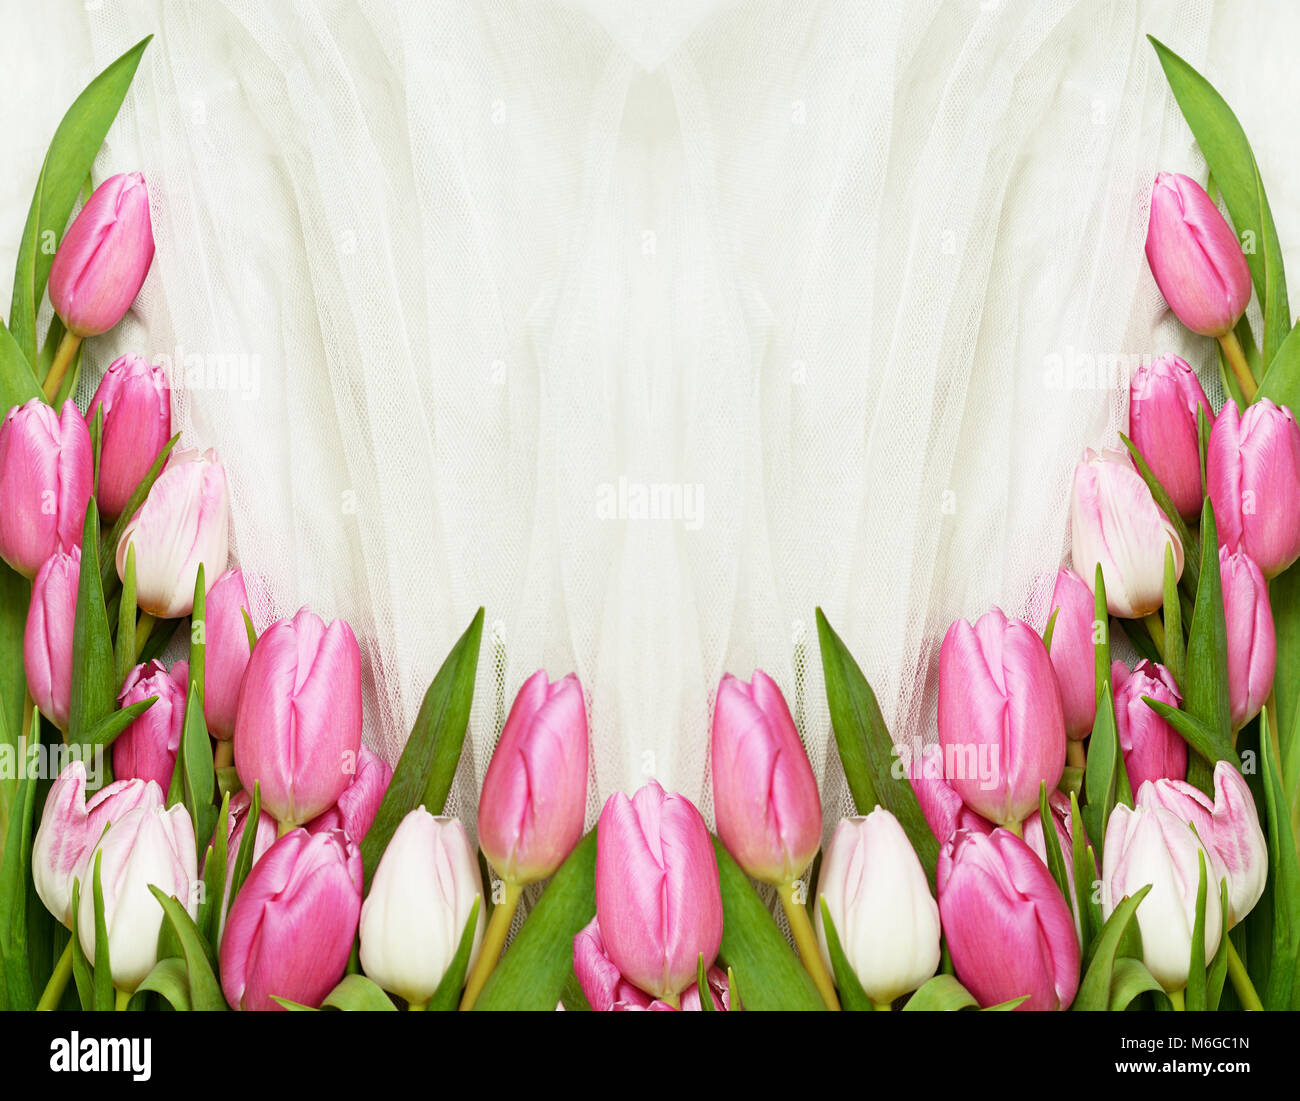 Pink tulip flowers on white tulle background. Top view. Flat lay. Stock Photo